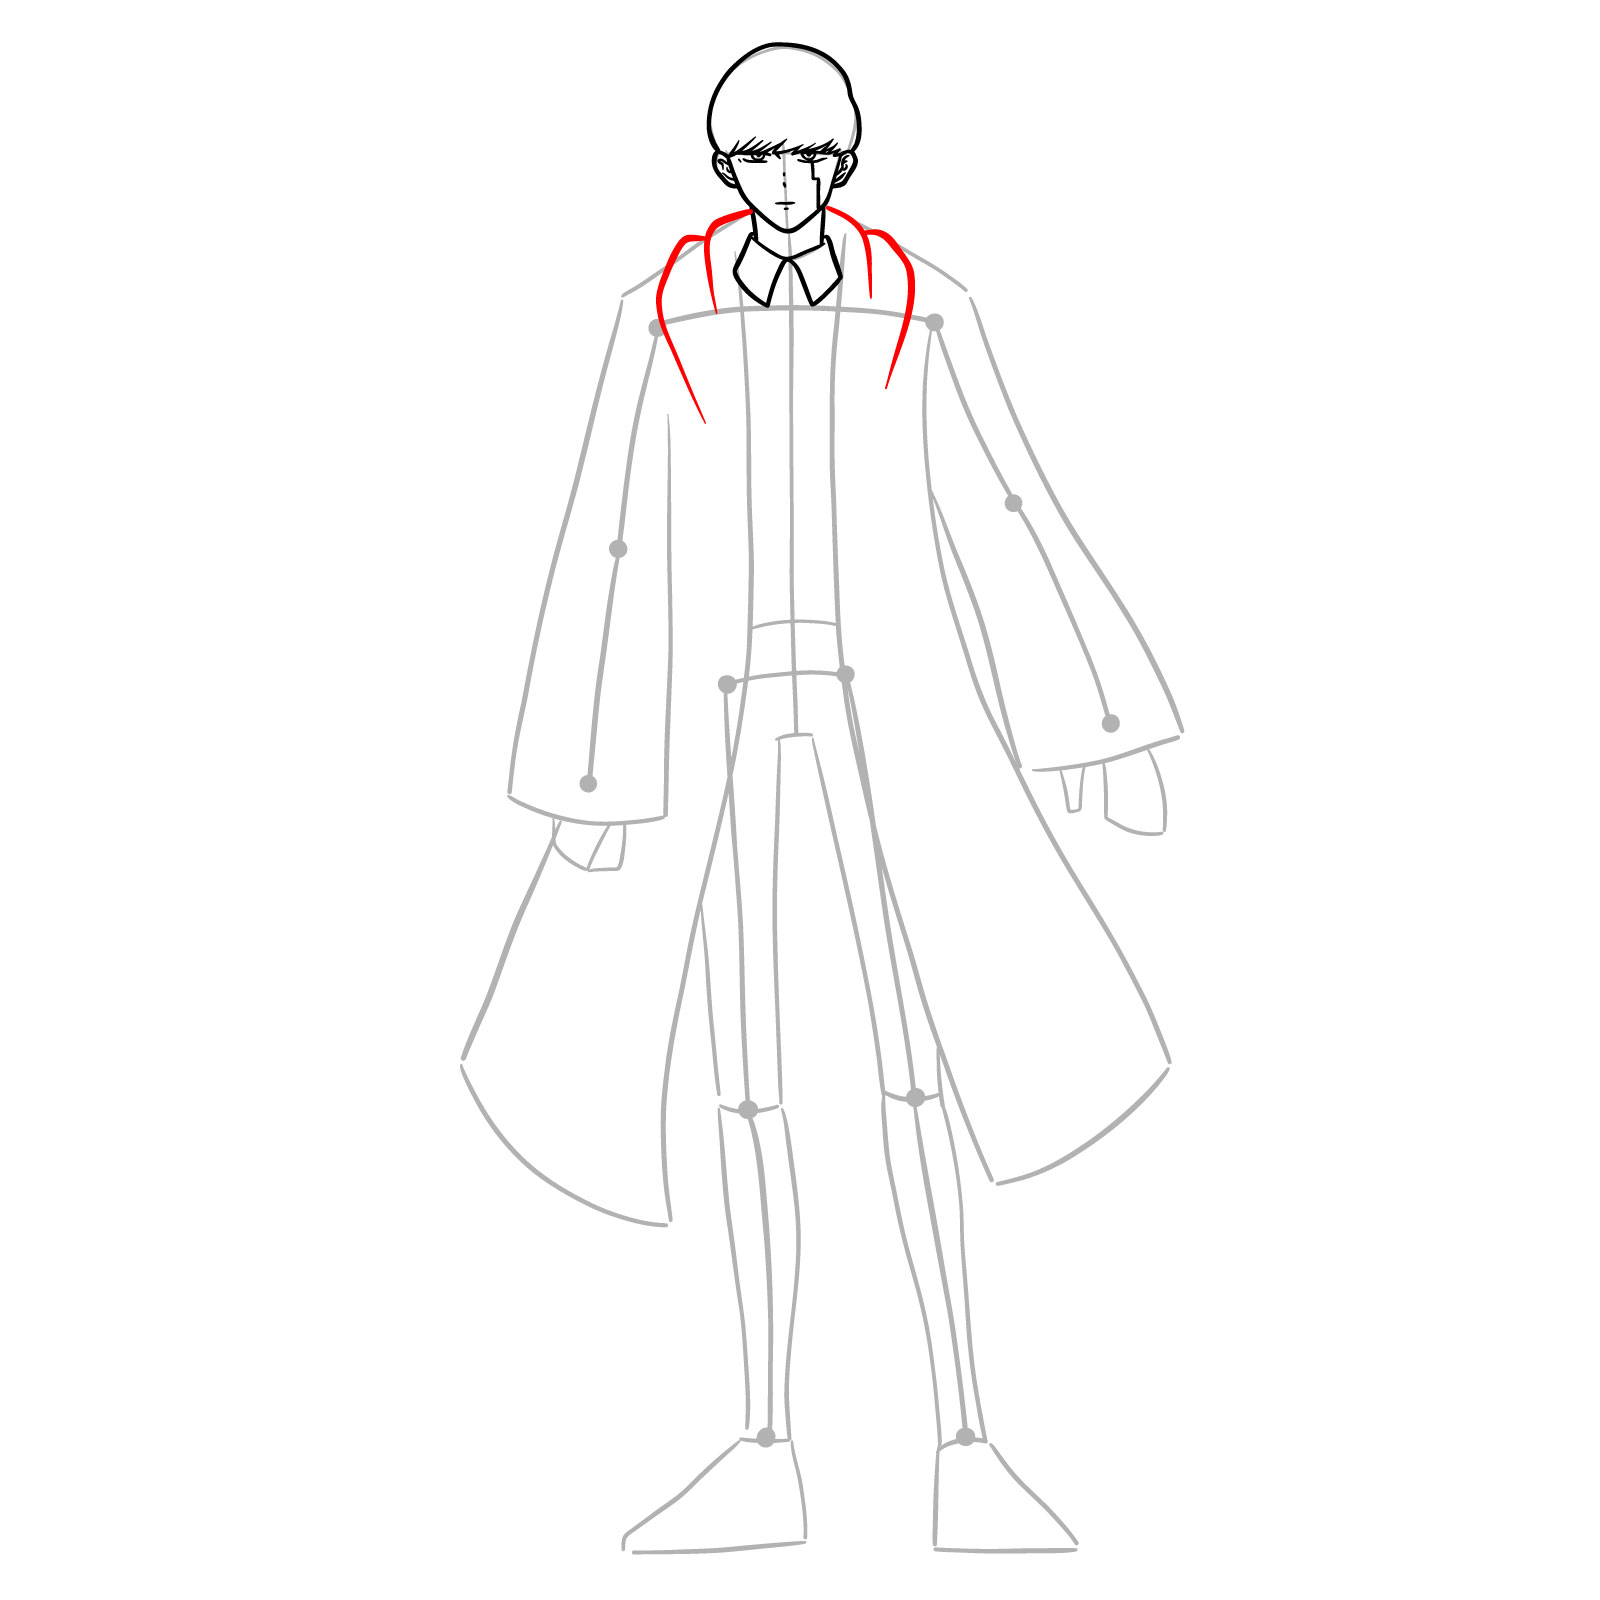 Mash full body drawing tutorial focusing on the collar of the cloak - step 09